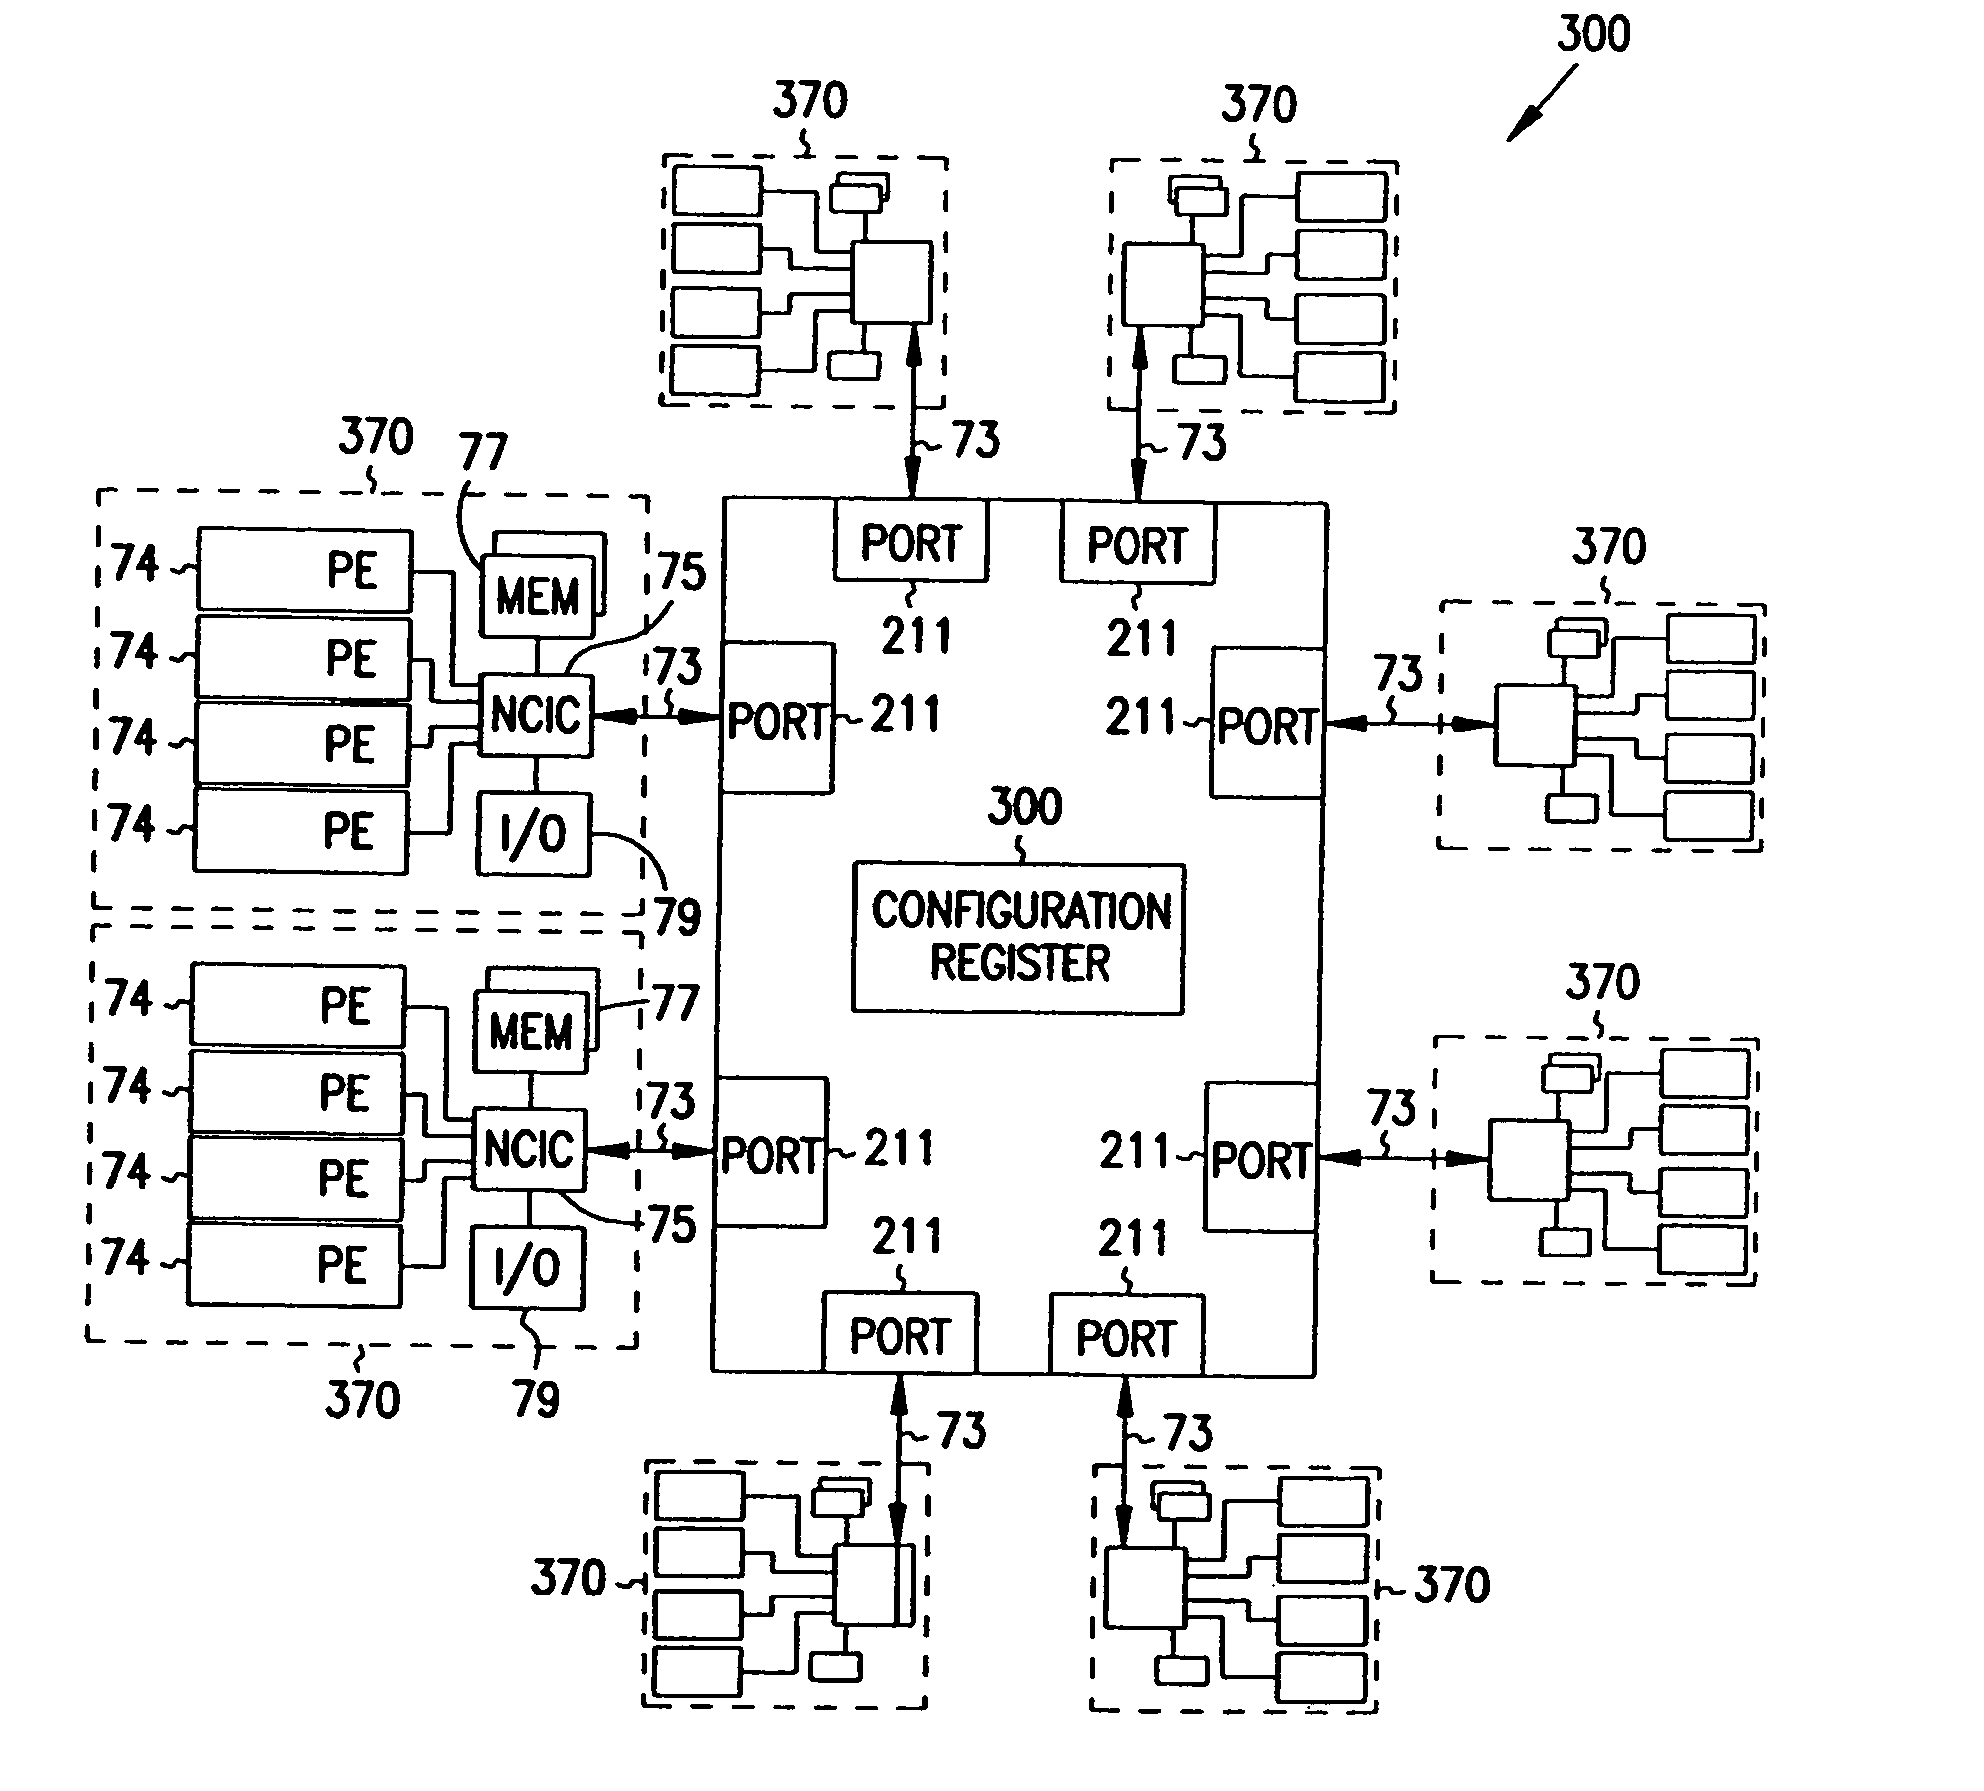 Multiprocessor node controller circuit and method